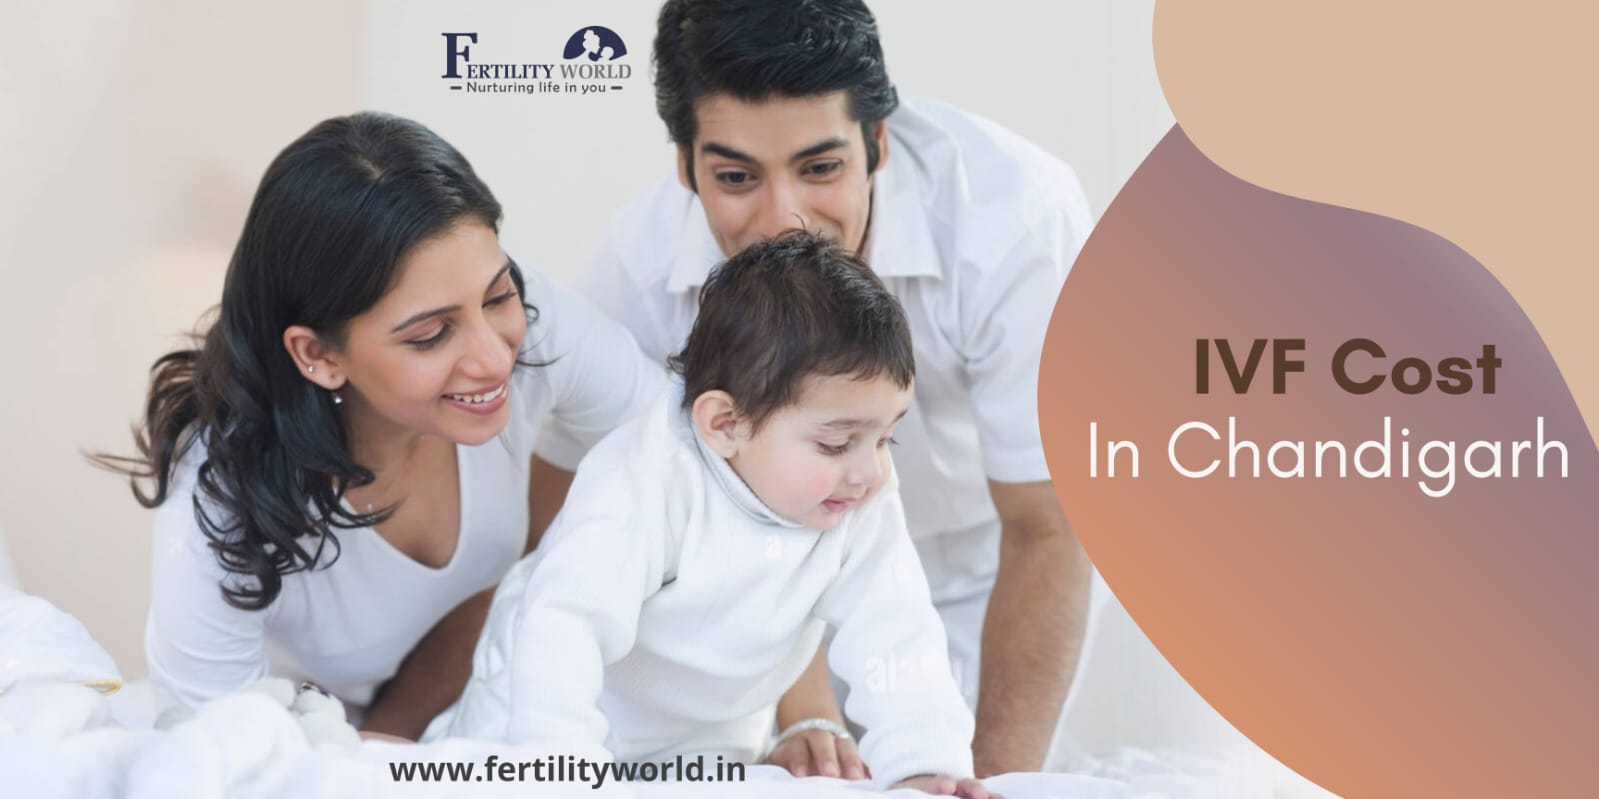 Cost of IVF in Chandigarh